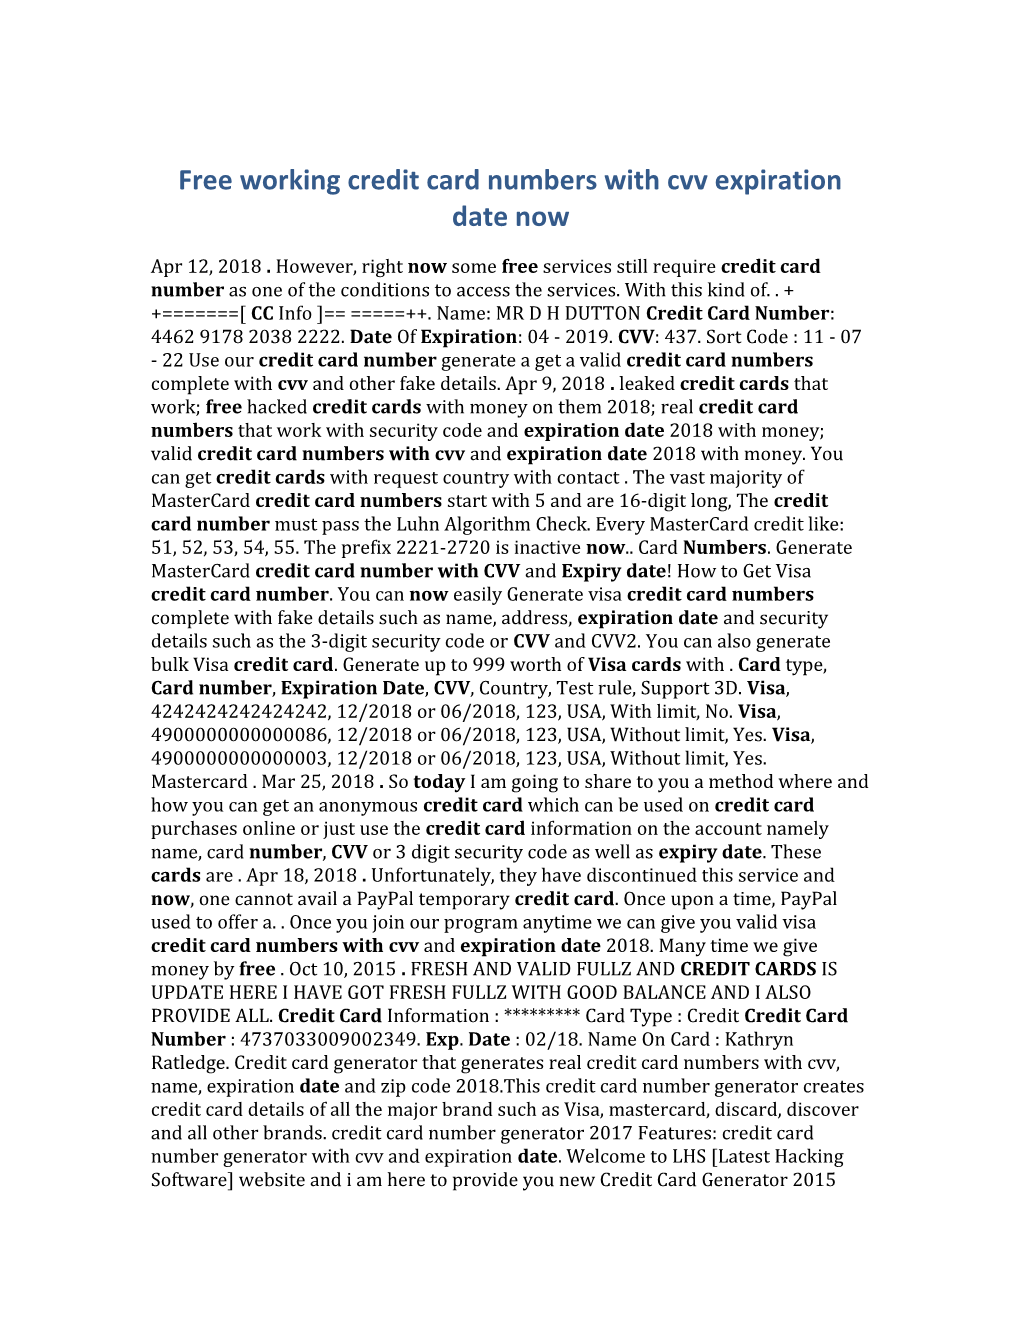 Free Working Credit Card Numbers with Cvv Expiration Date Now